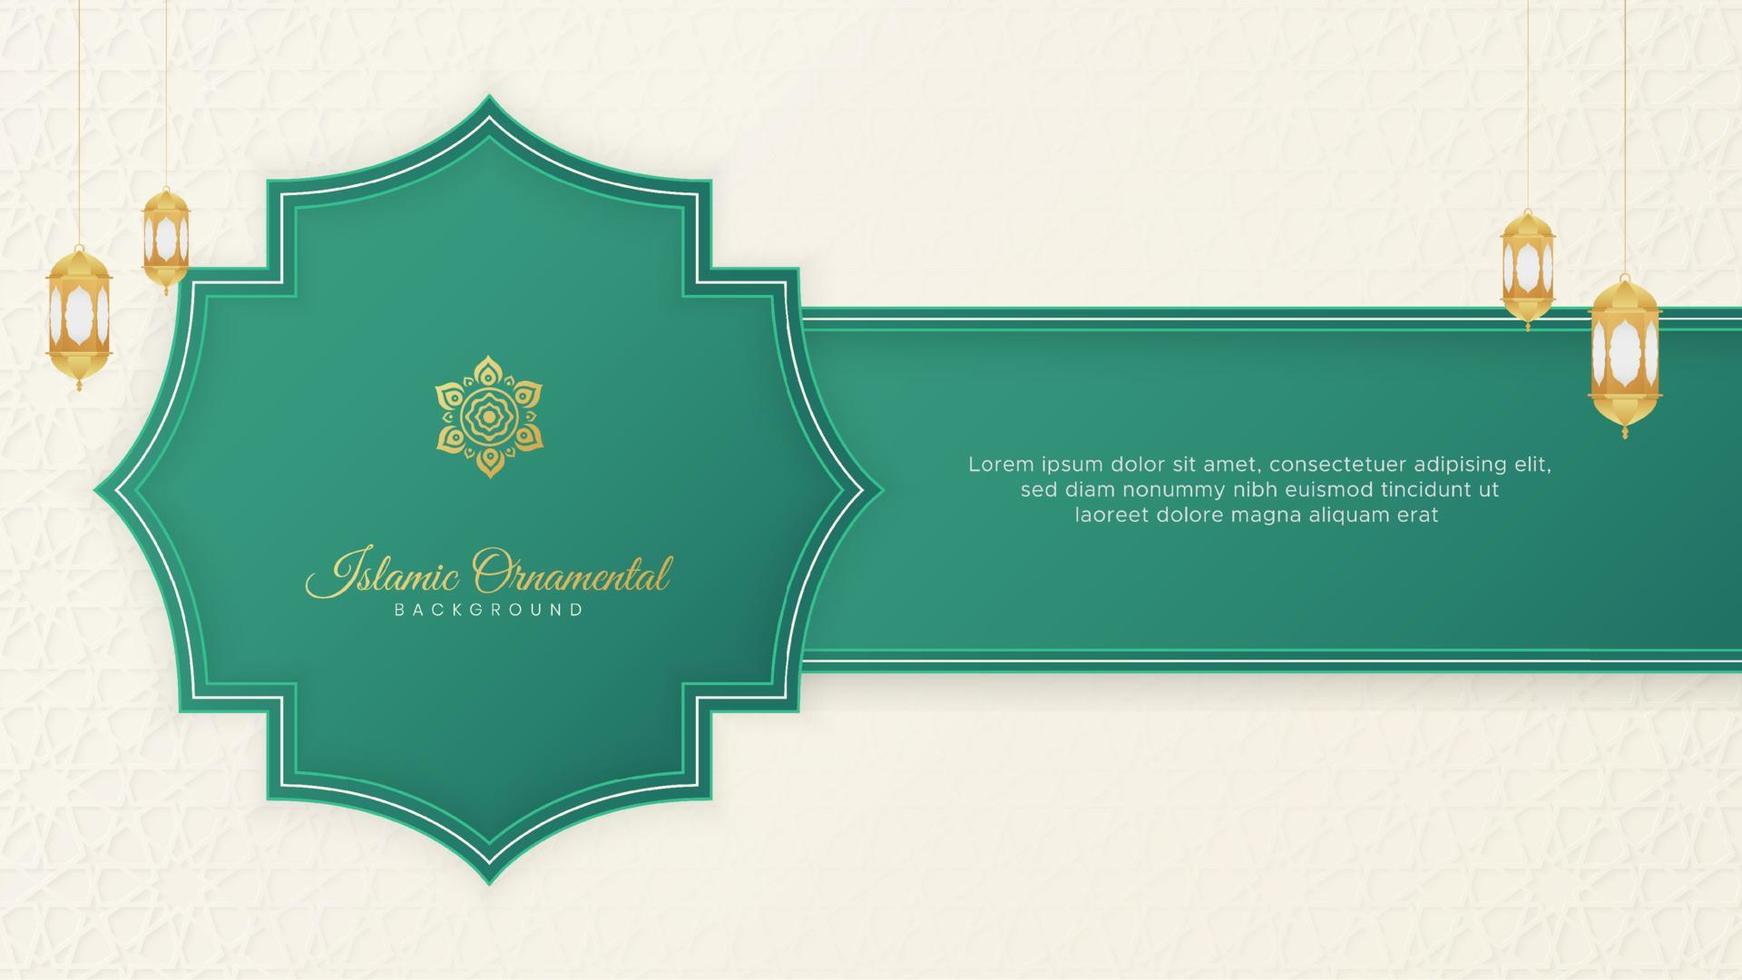 Islamic Ornamental Arabic Green and White Luxury Background with Geometric pattern and Ornament vector